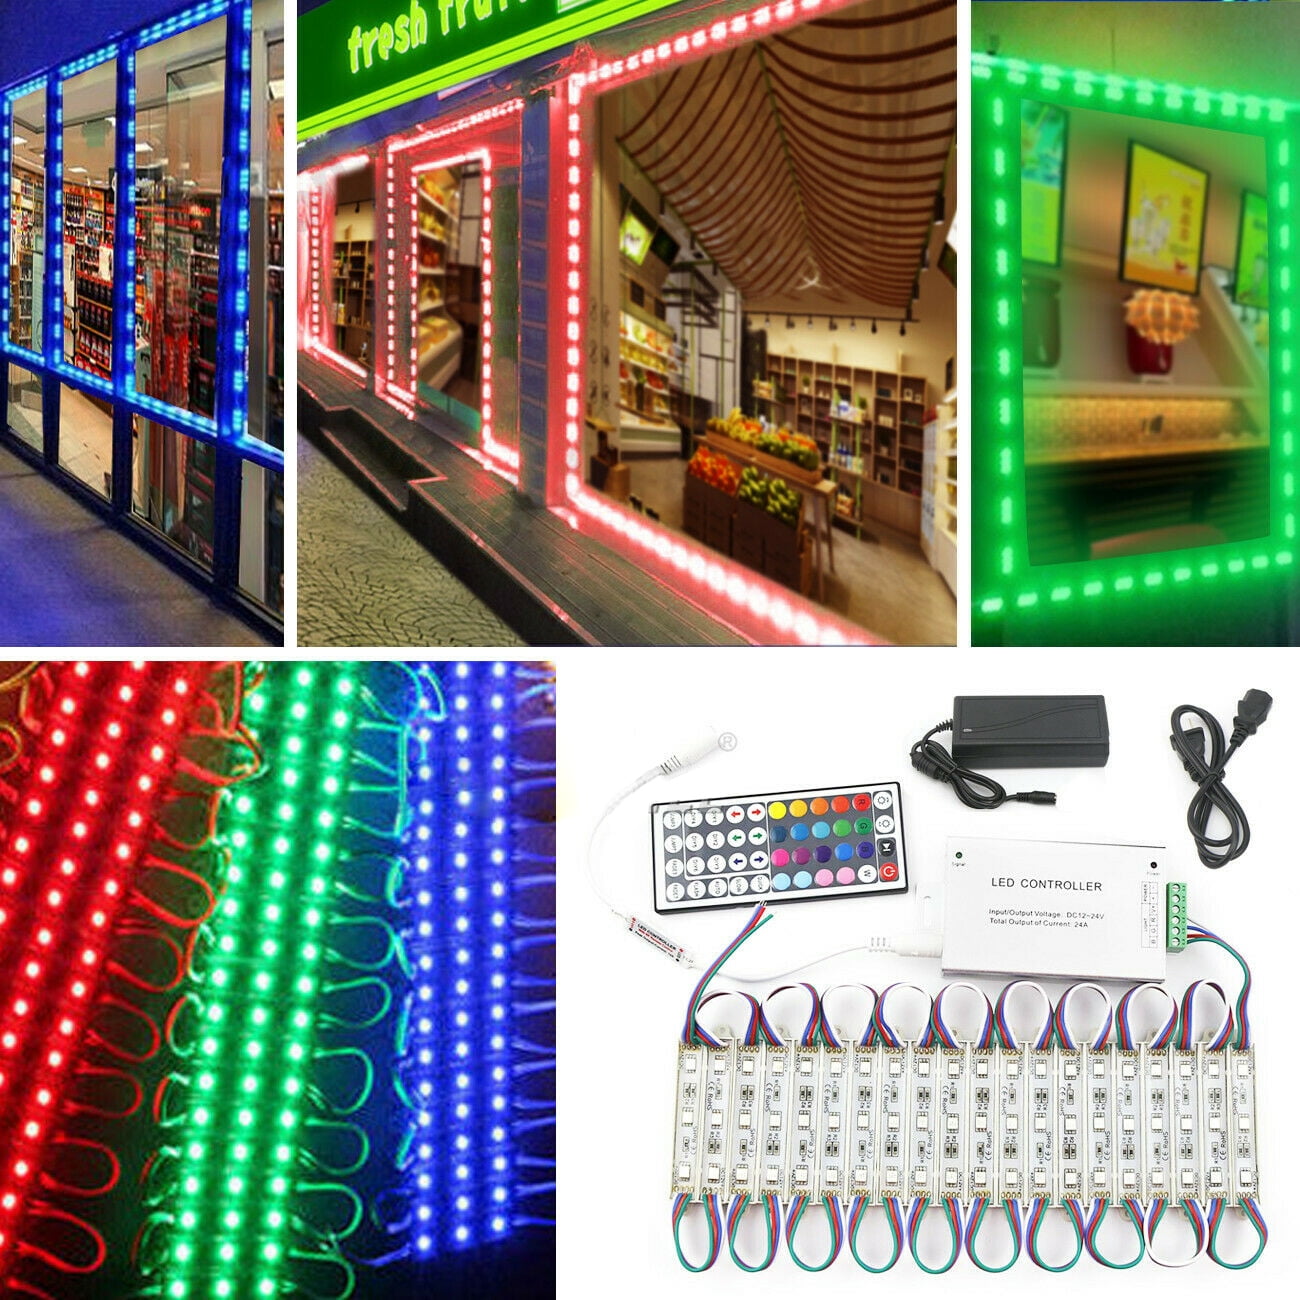 Remote+Power US 50~100FT 5050 SMD 3 LED Module STORE FRONT Window Light Strip 